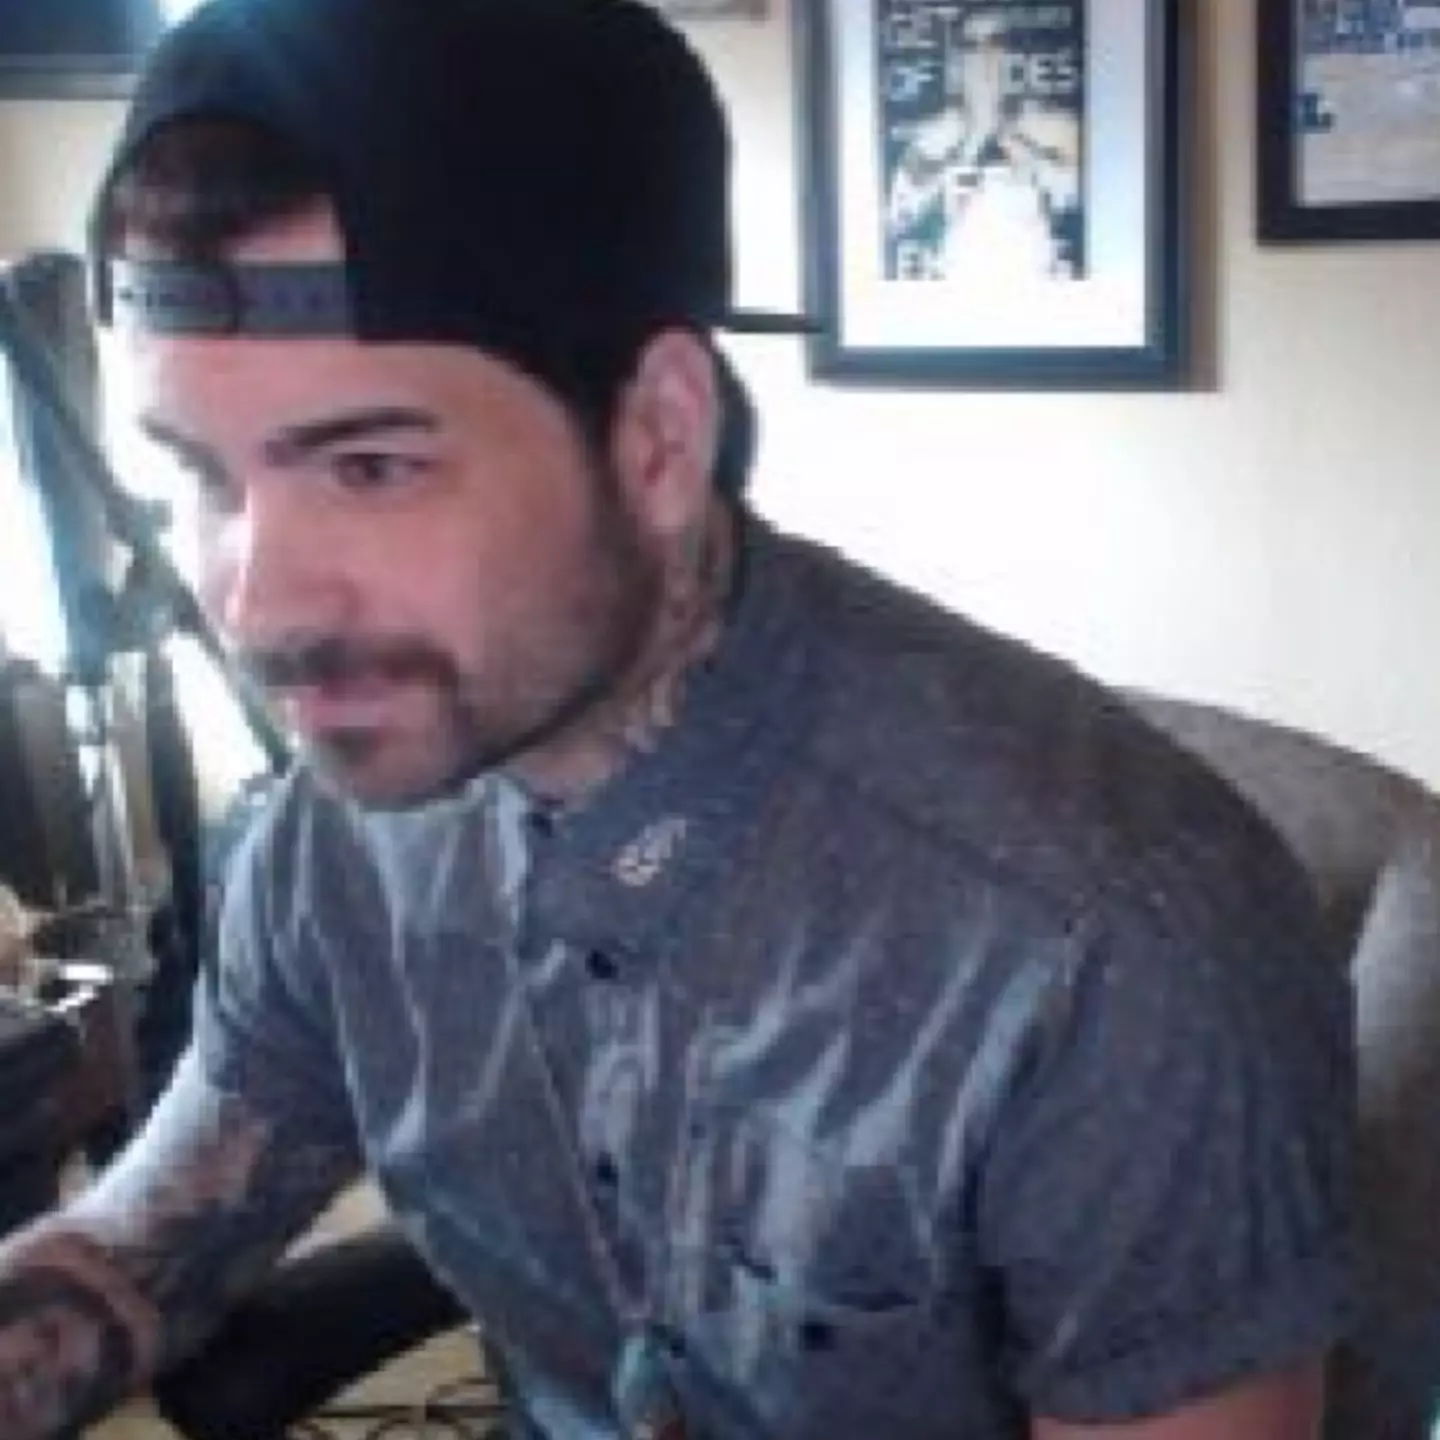 Hunter Moore set up the website 'Is Anyone Up?'